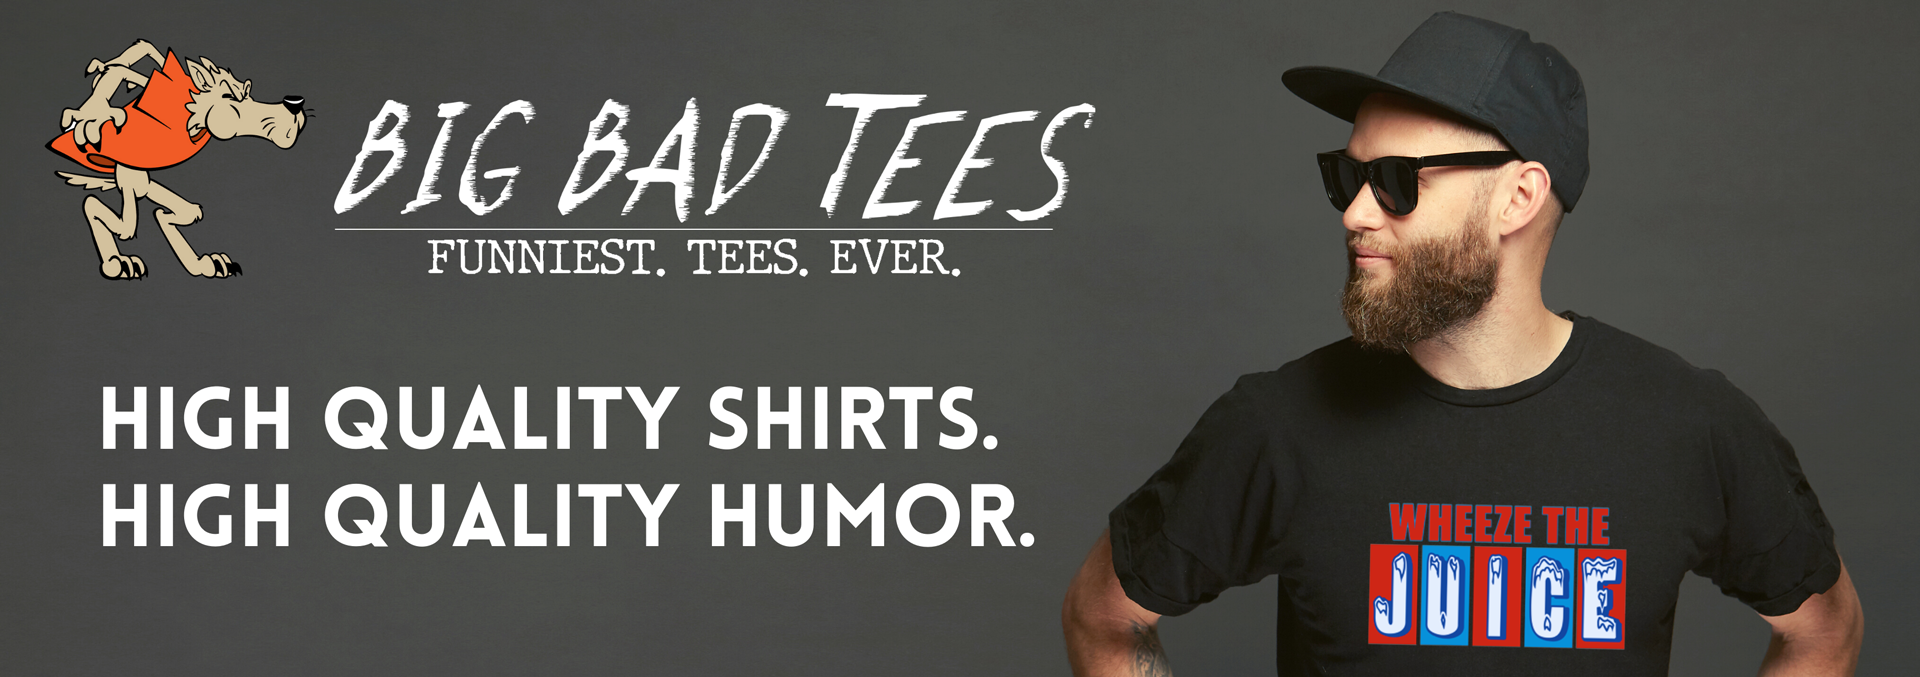 BigBadTees.com Funniest.Tees.Ever. Funny T-Shirts Main Banner 